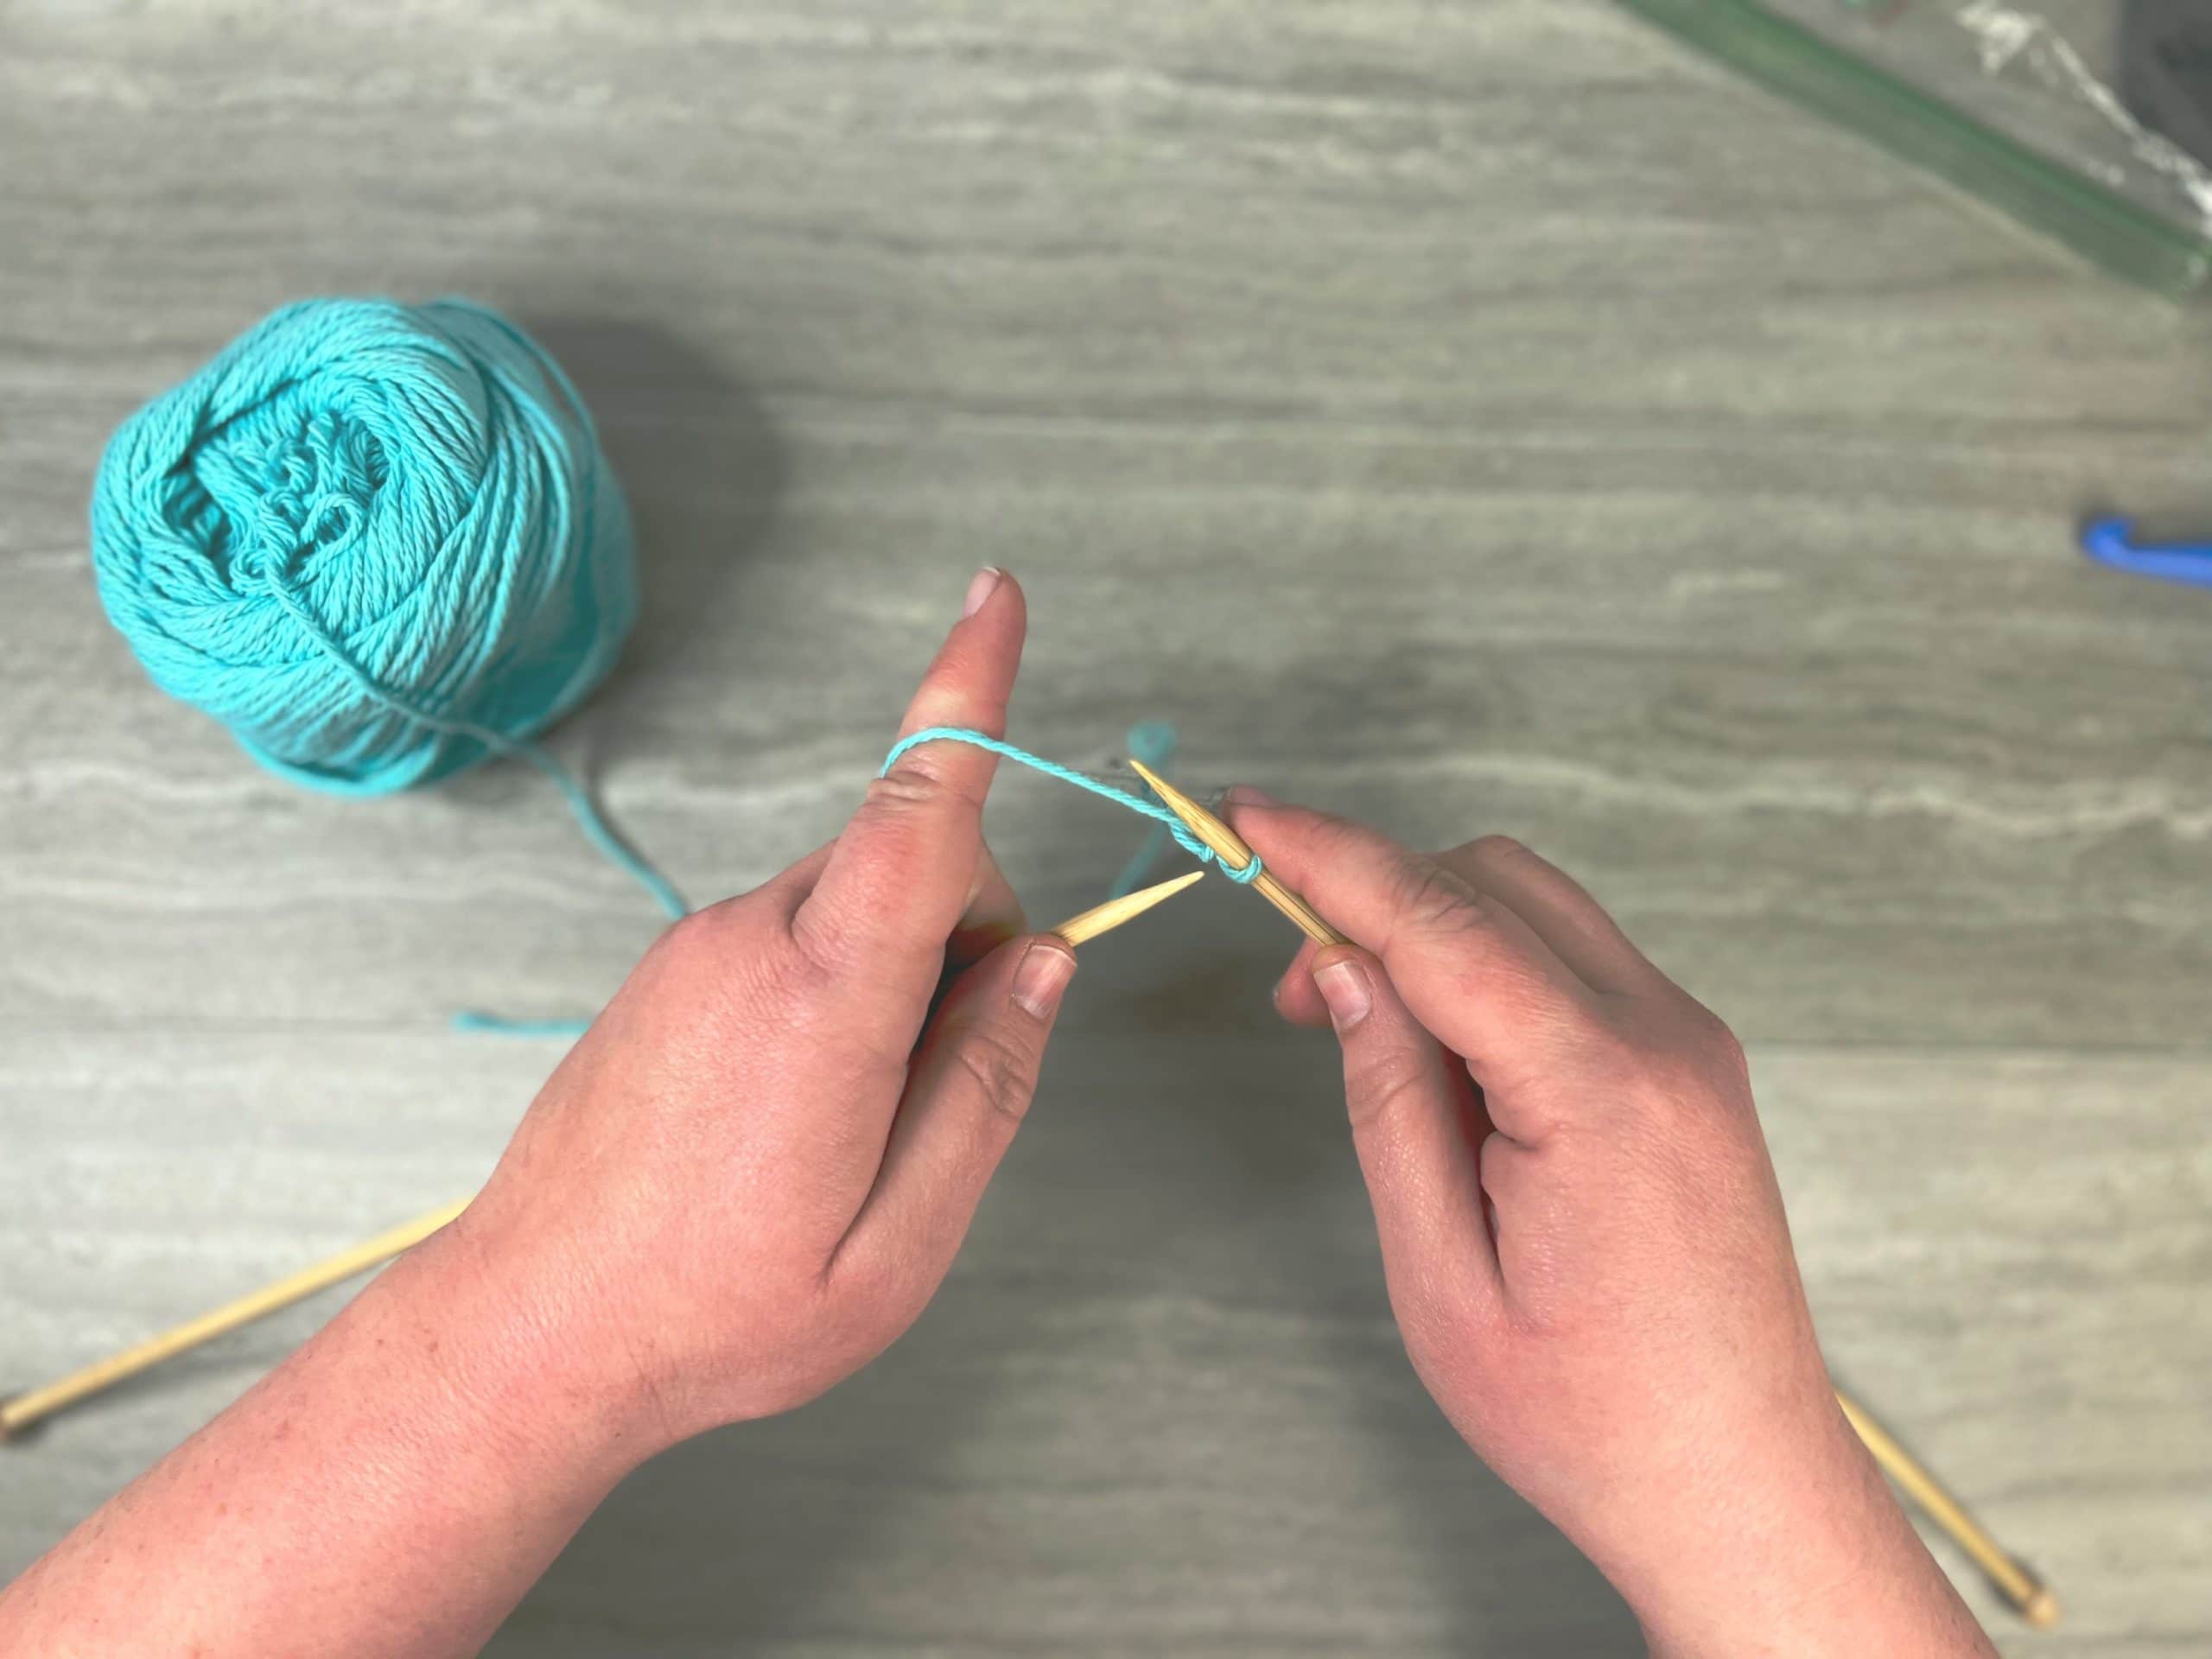 Knitting with Tensioning techniques